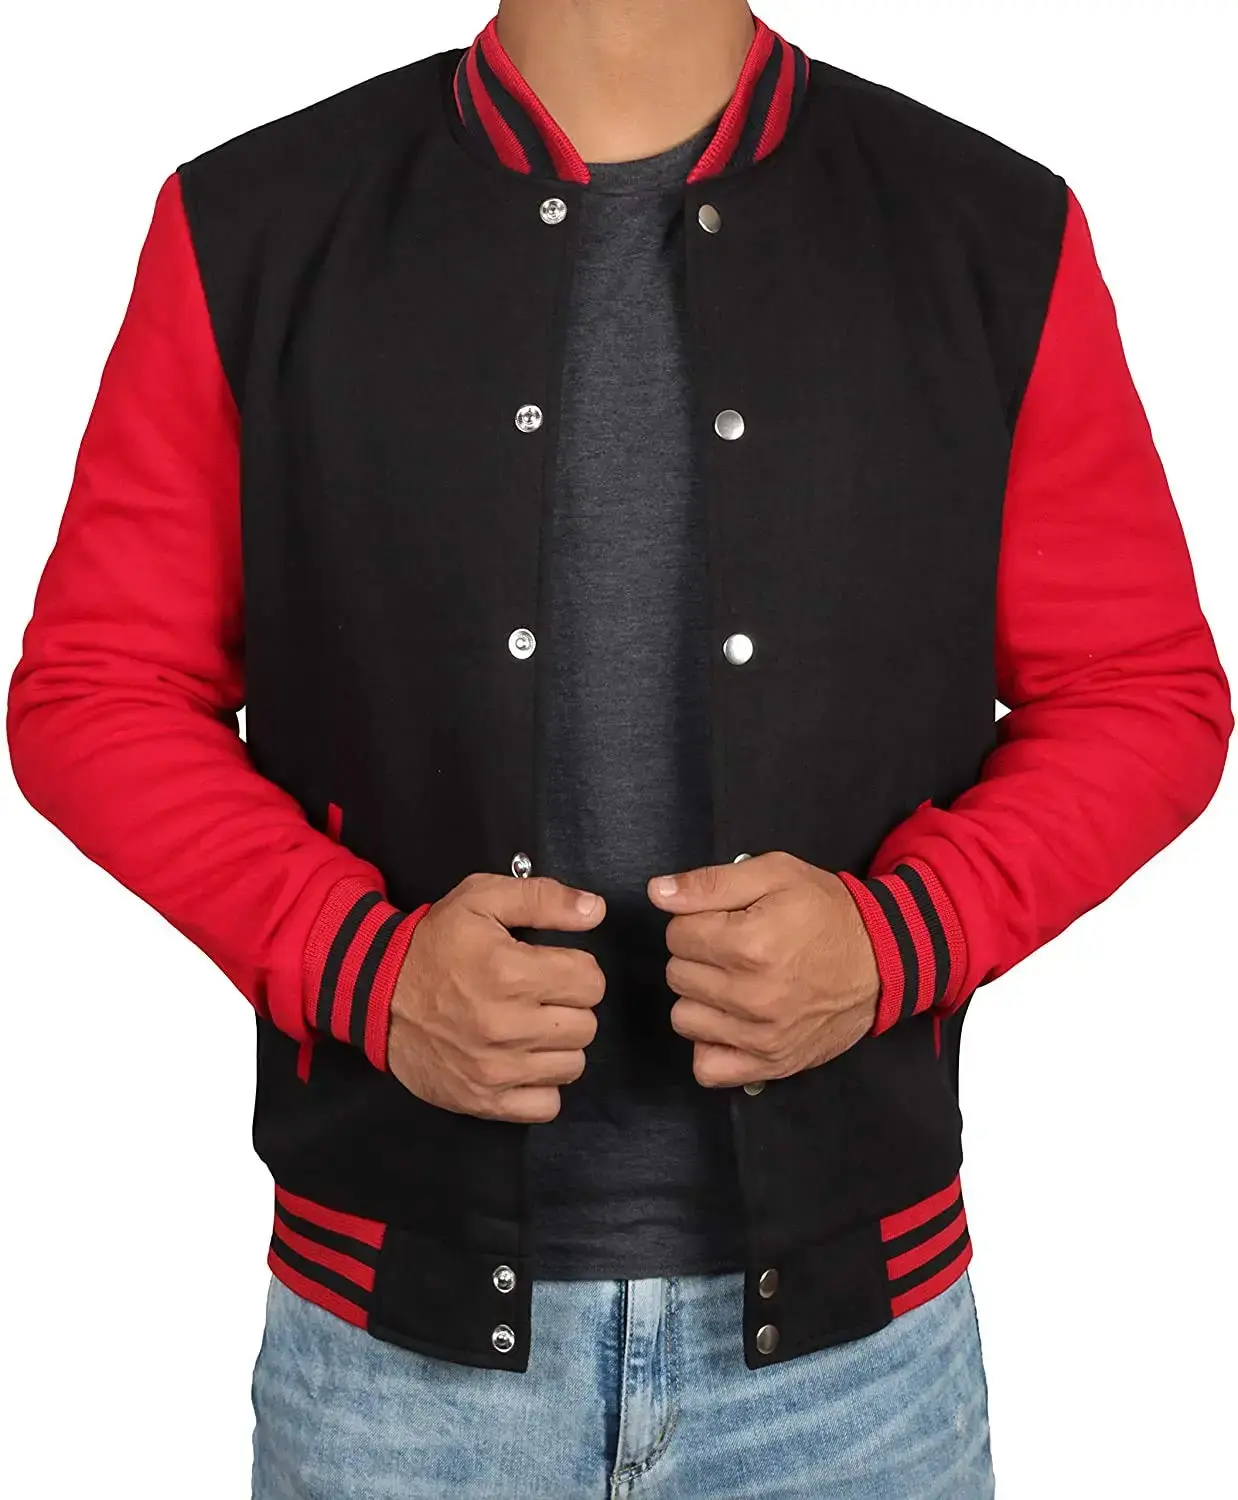 black-red-quilted-varsity-jacket-for-mens (4)